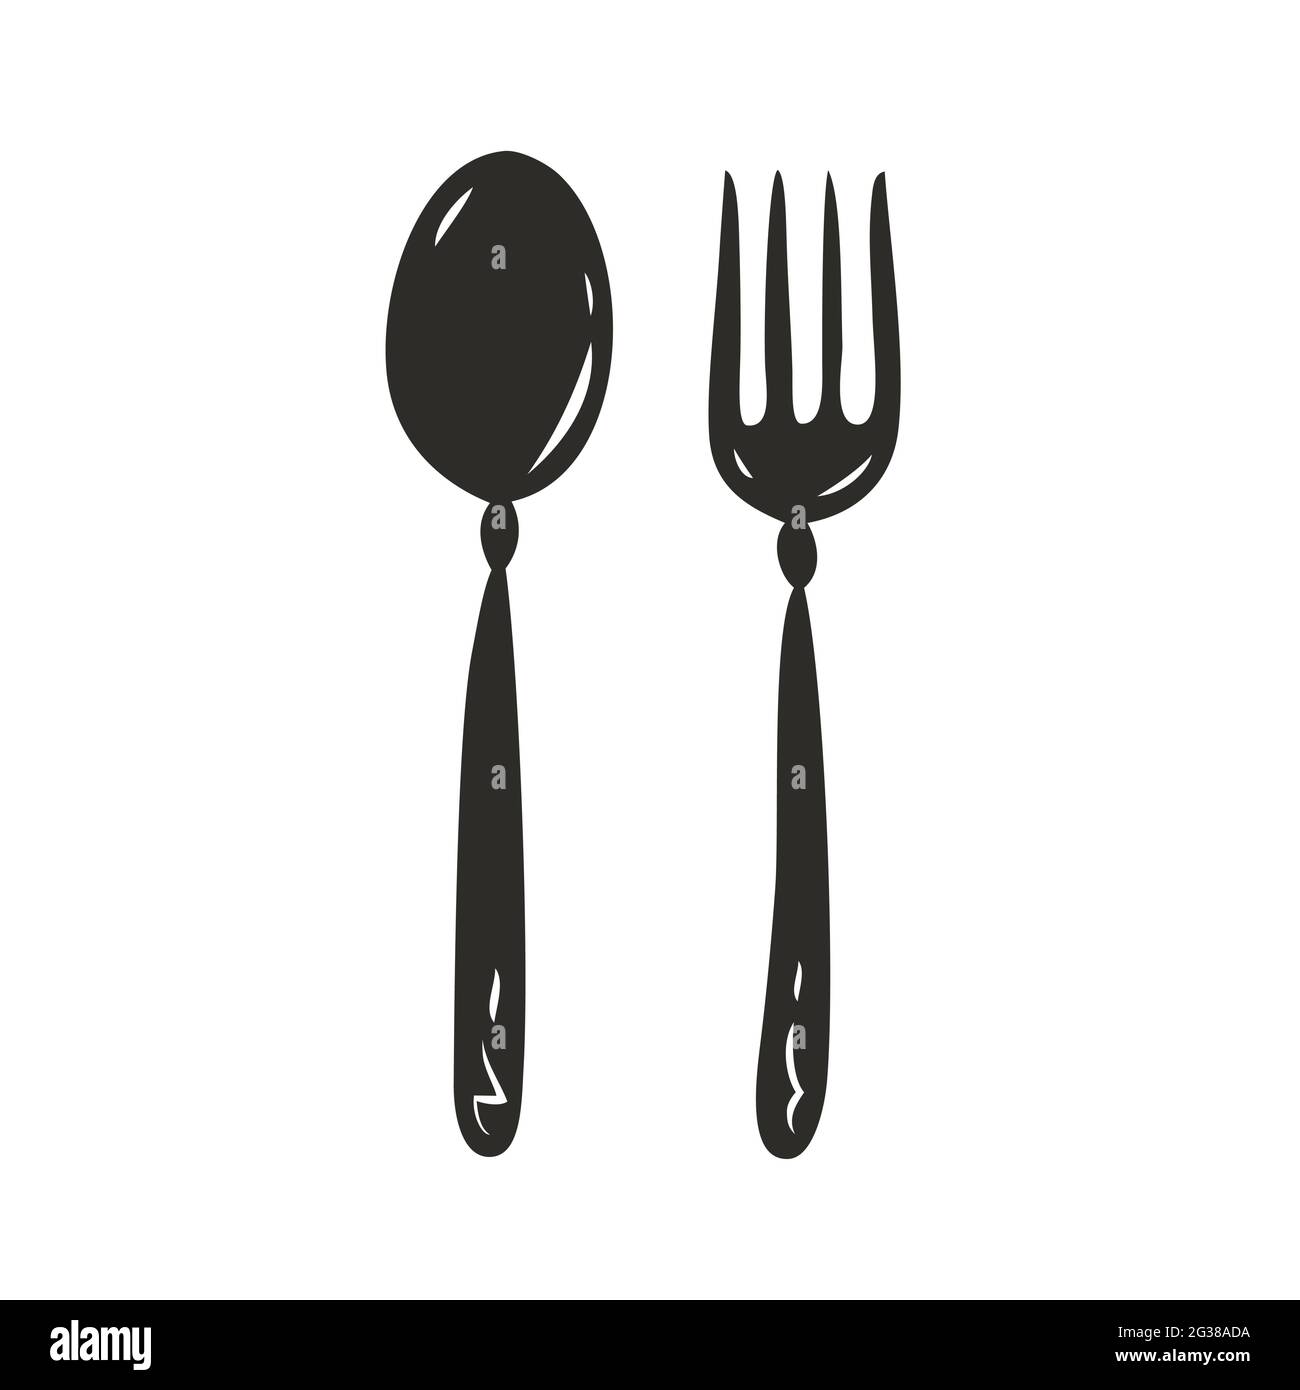 Spoon and fork symbol. Food concept vector illustration Stock Vector